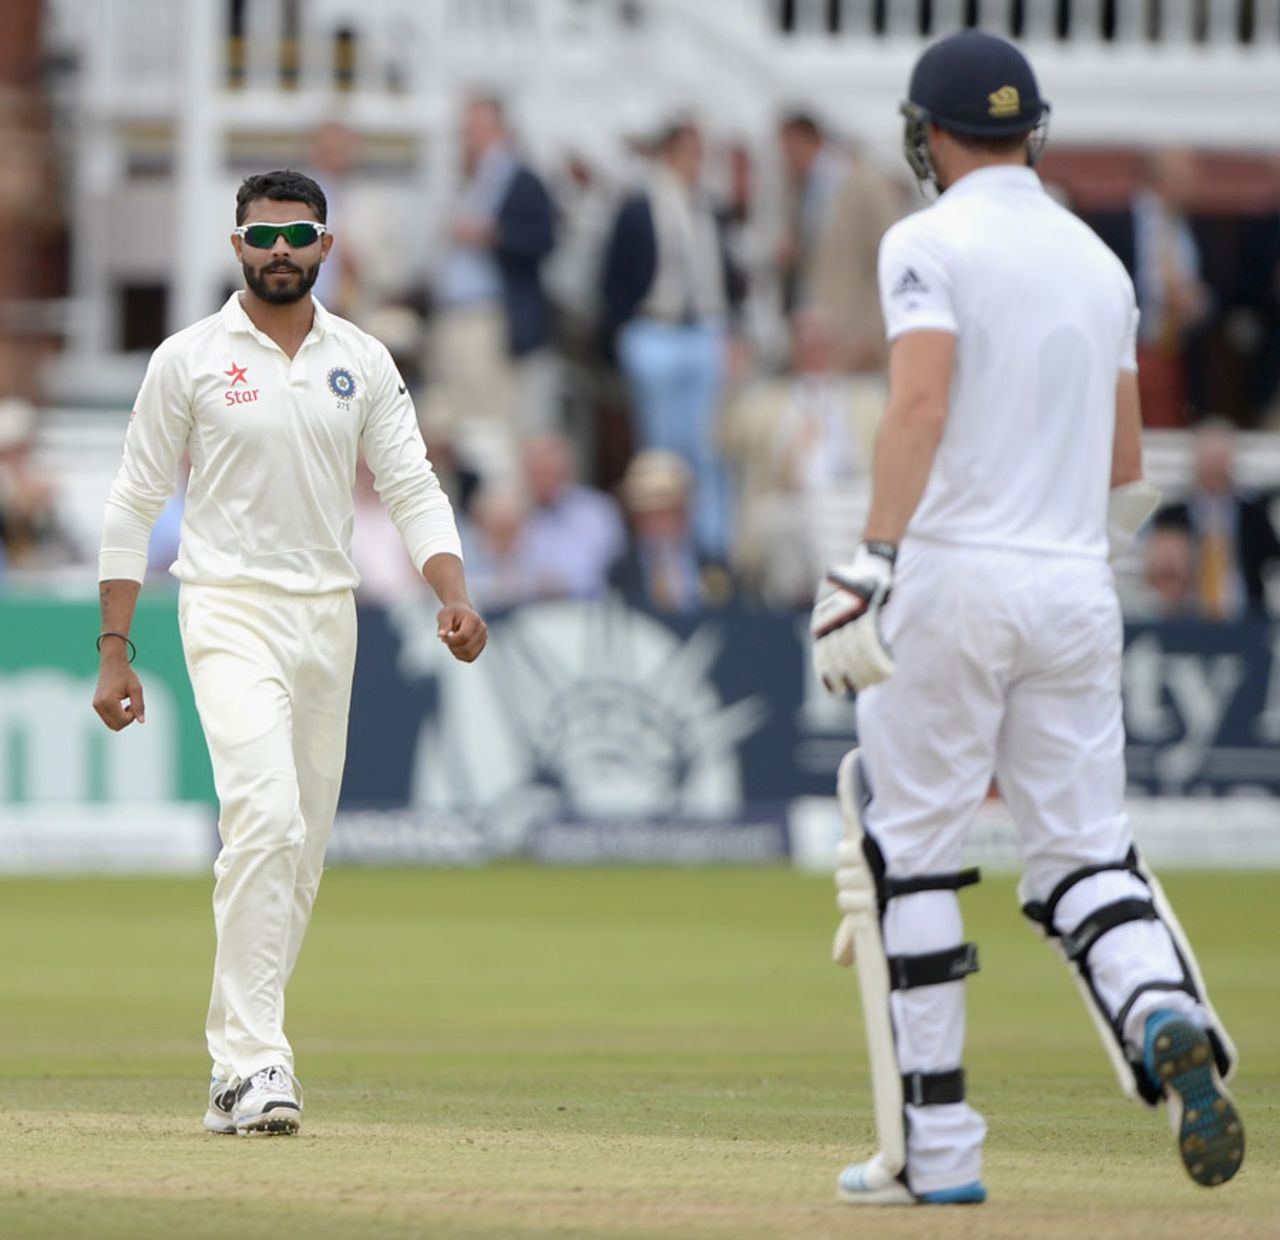 Ravindra Jadeja and James Anderson come face to face, England v India, 2nd Investec Test, Lord's, 3rd day, July 19, 2014